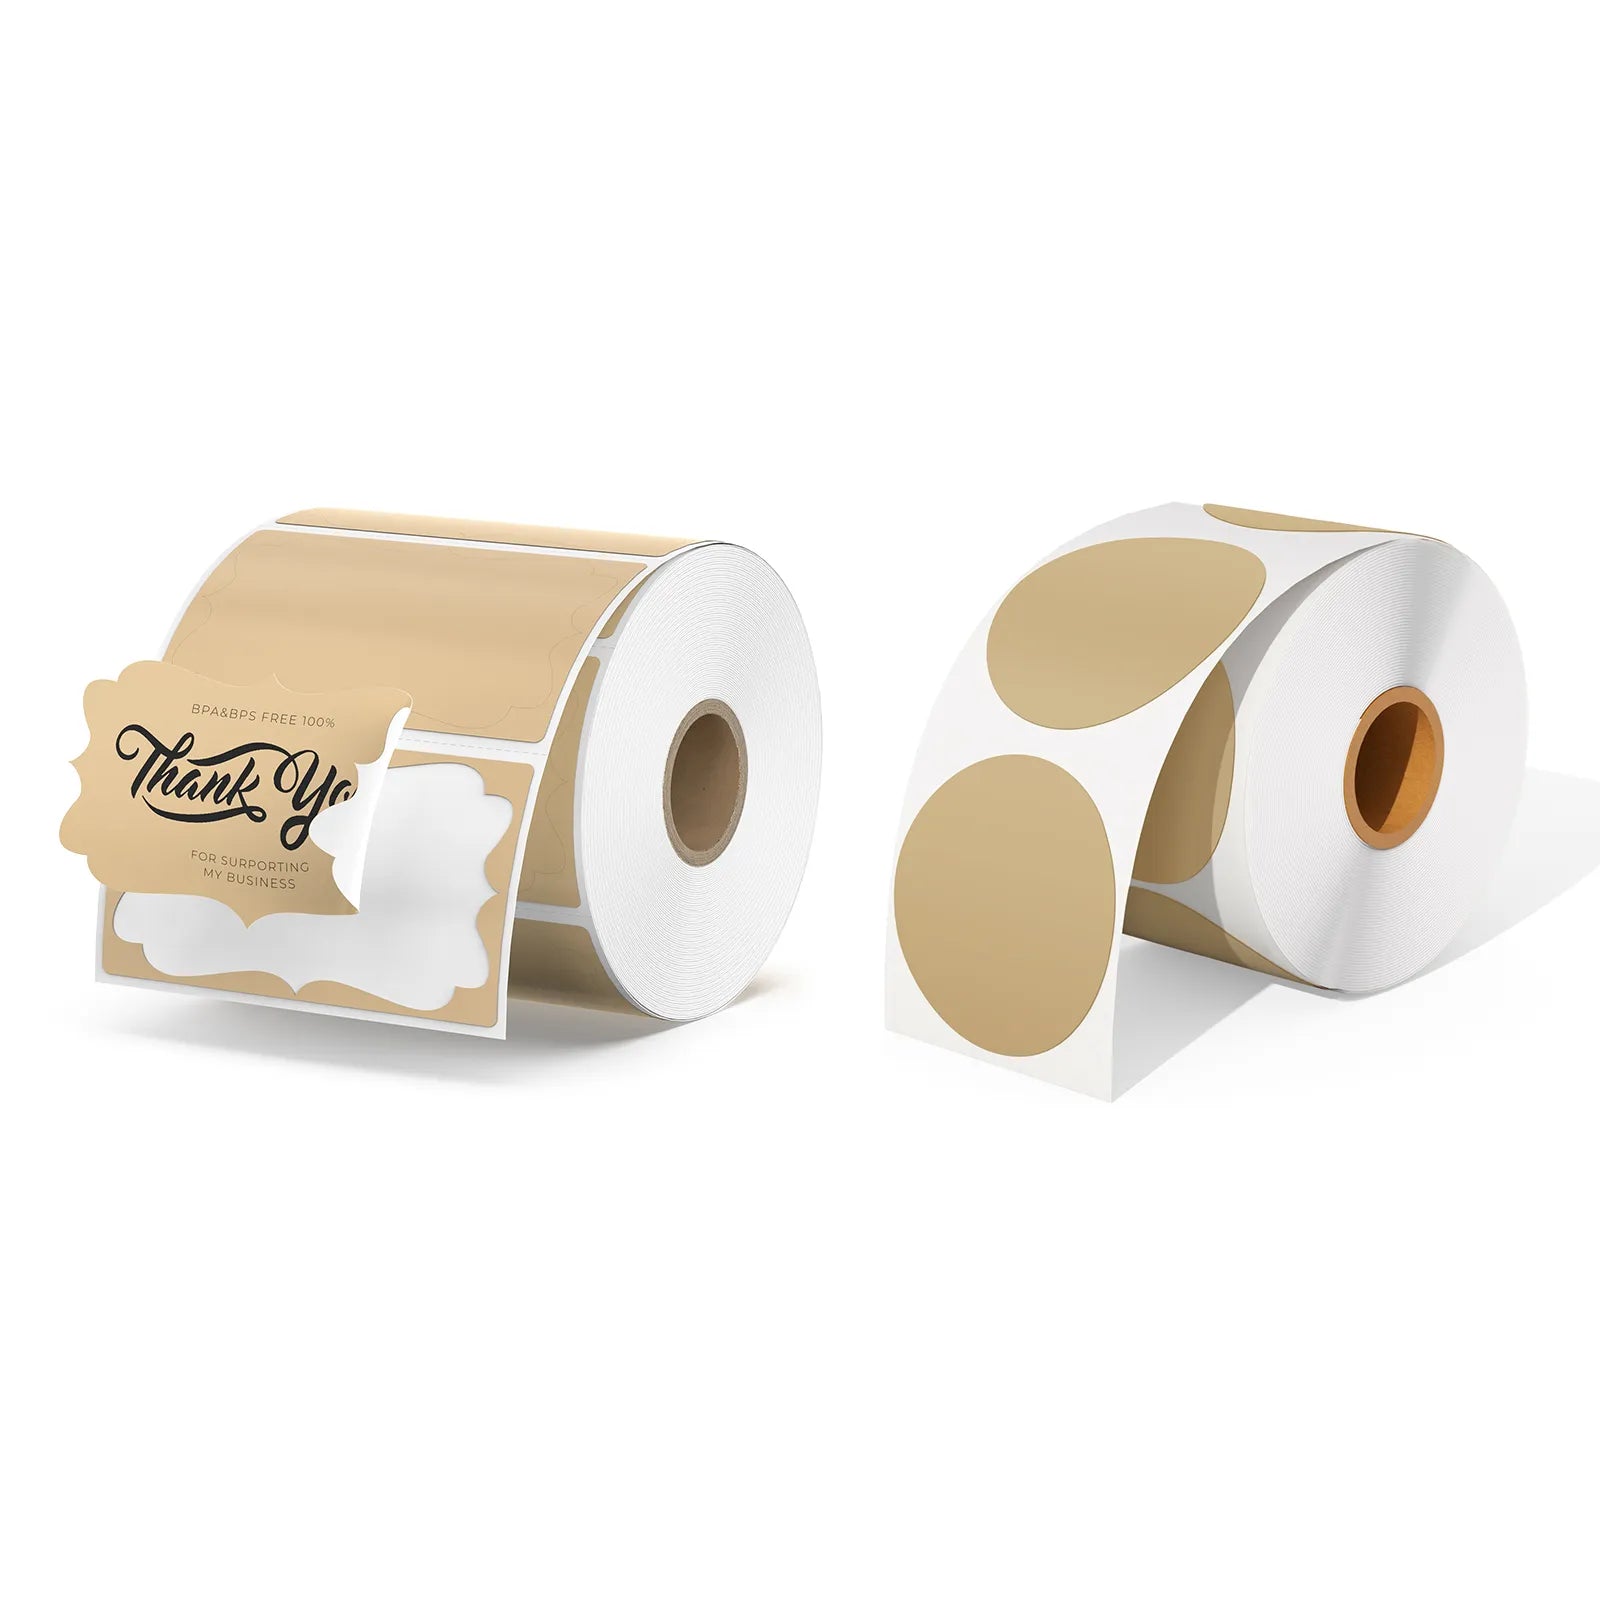 Brown Kraft Paper Roll for wedding party home decoration Natural